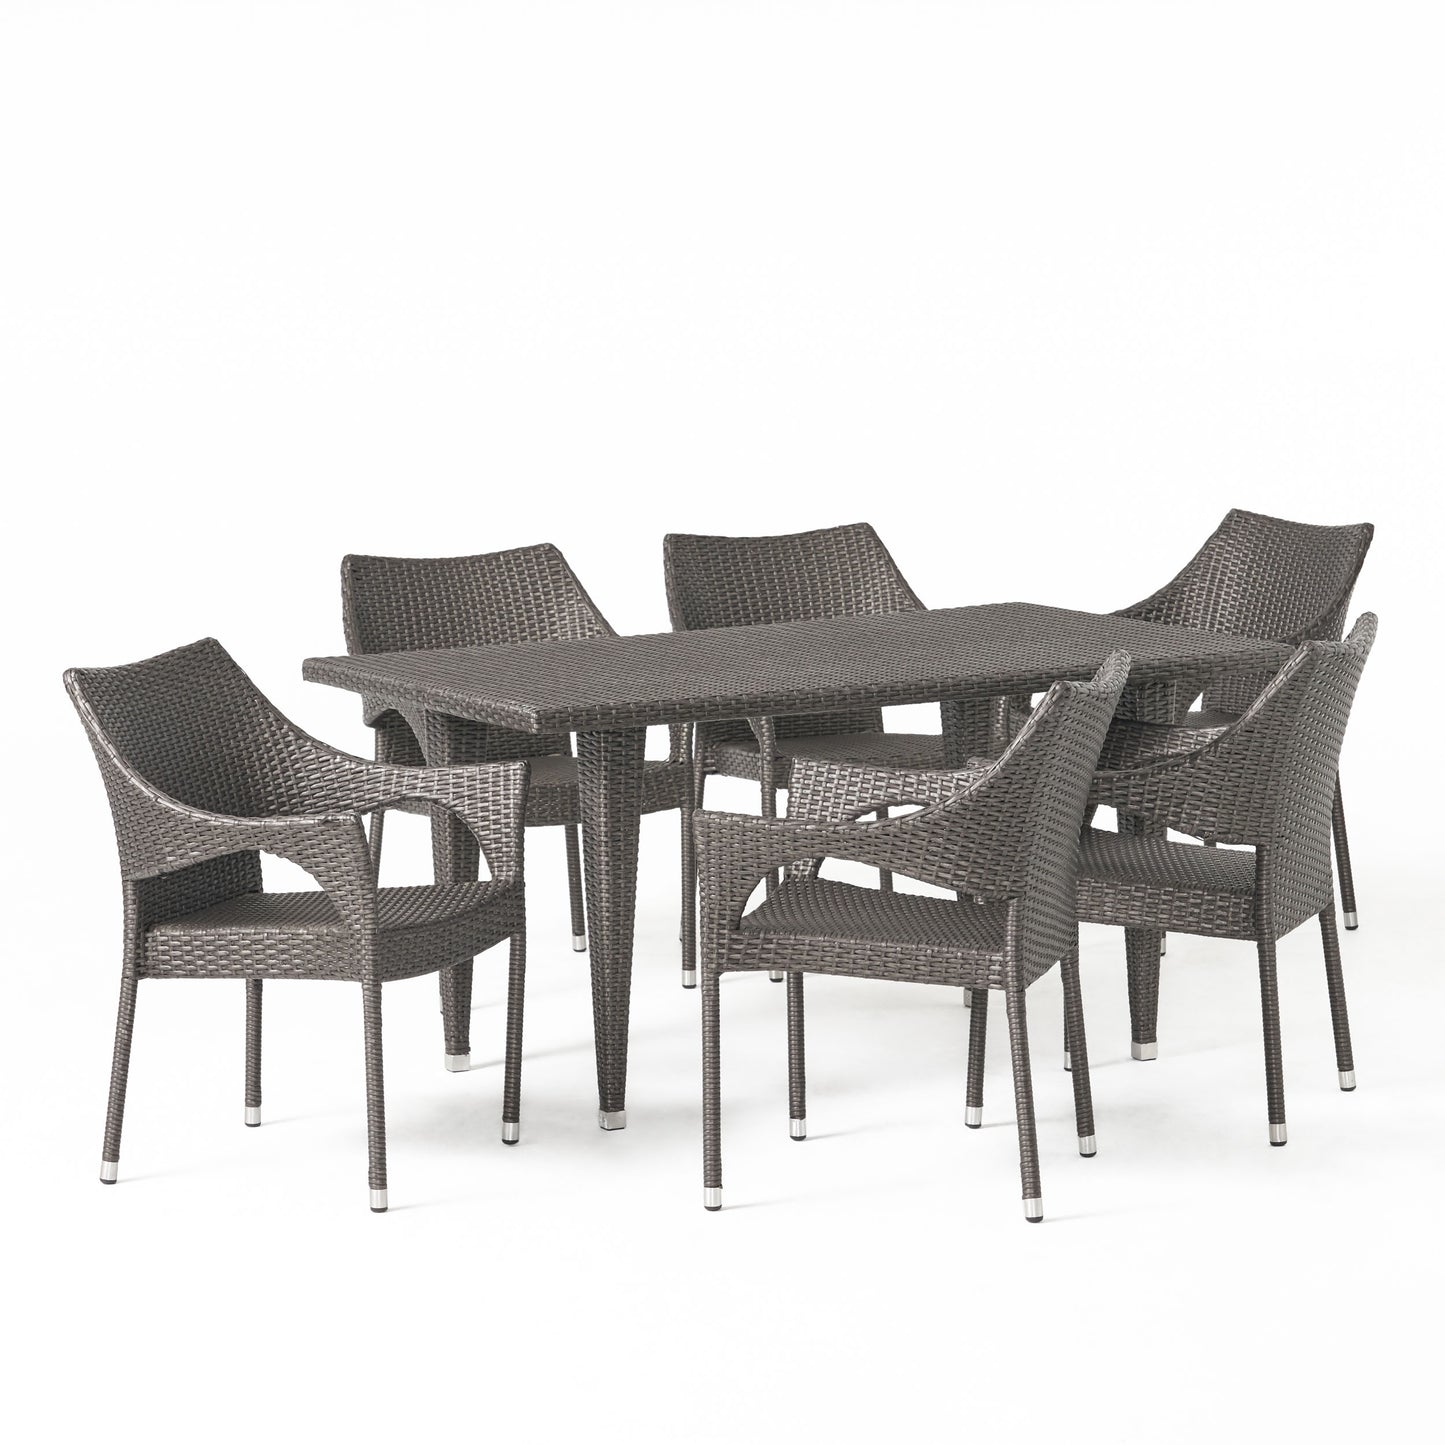 Alameda Outdoor 7-Piece Gray Wicker Dining Set with Stacking Chairs